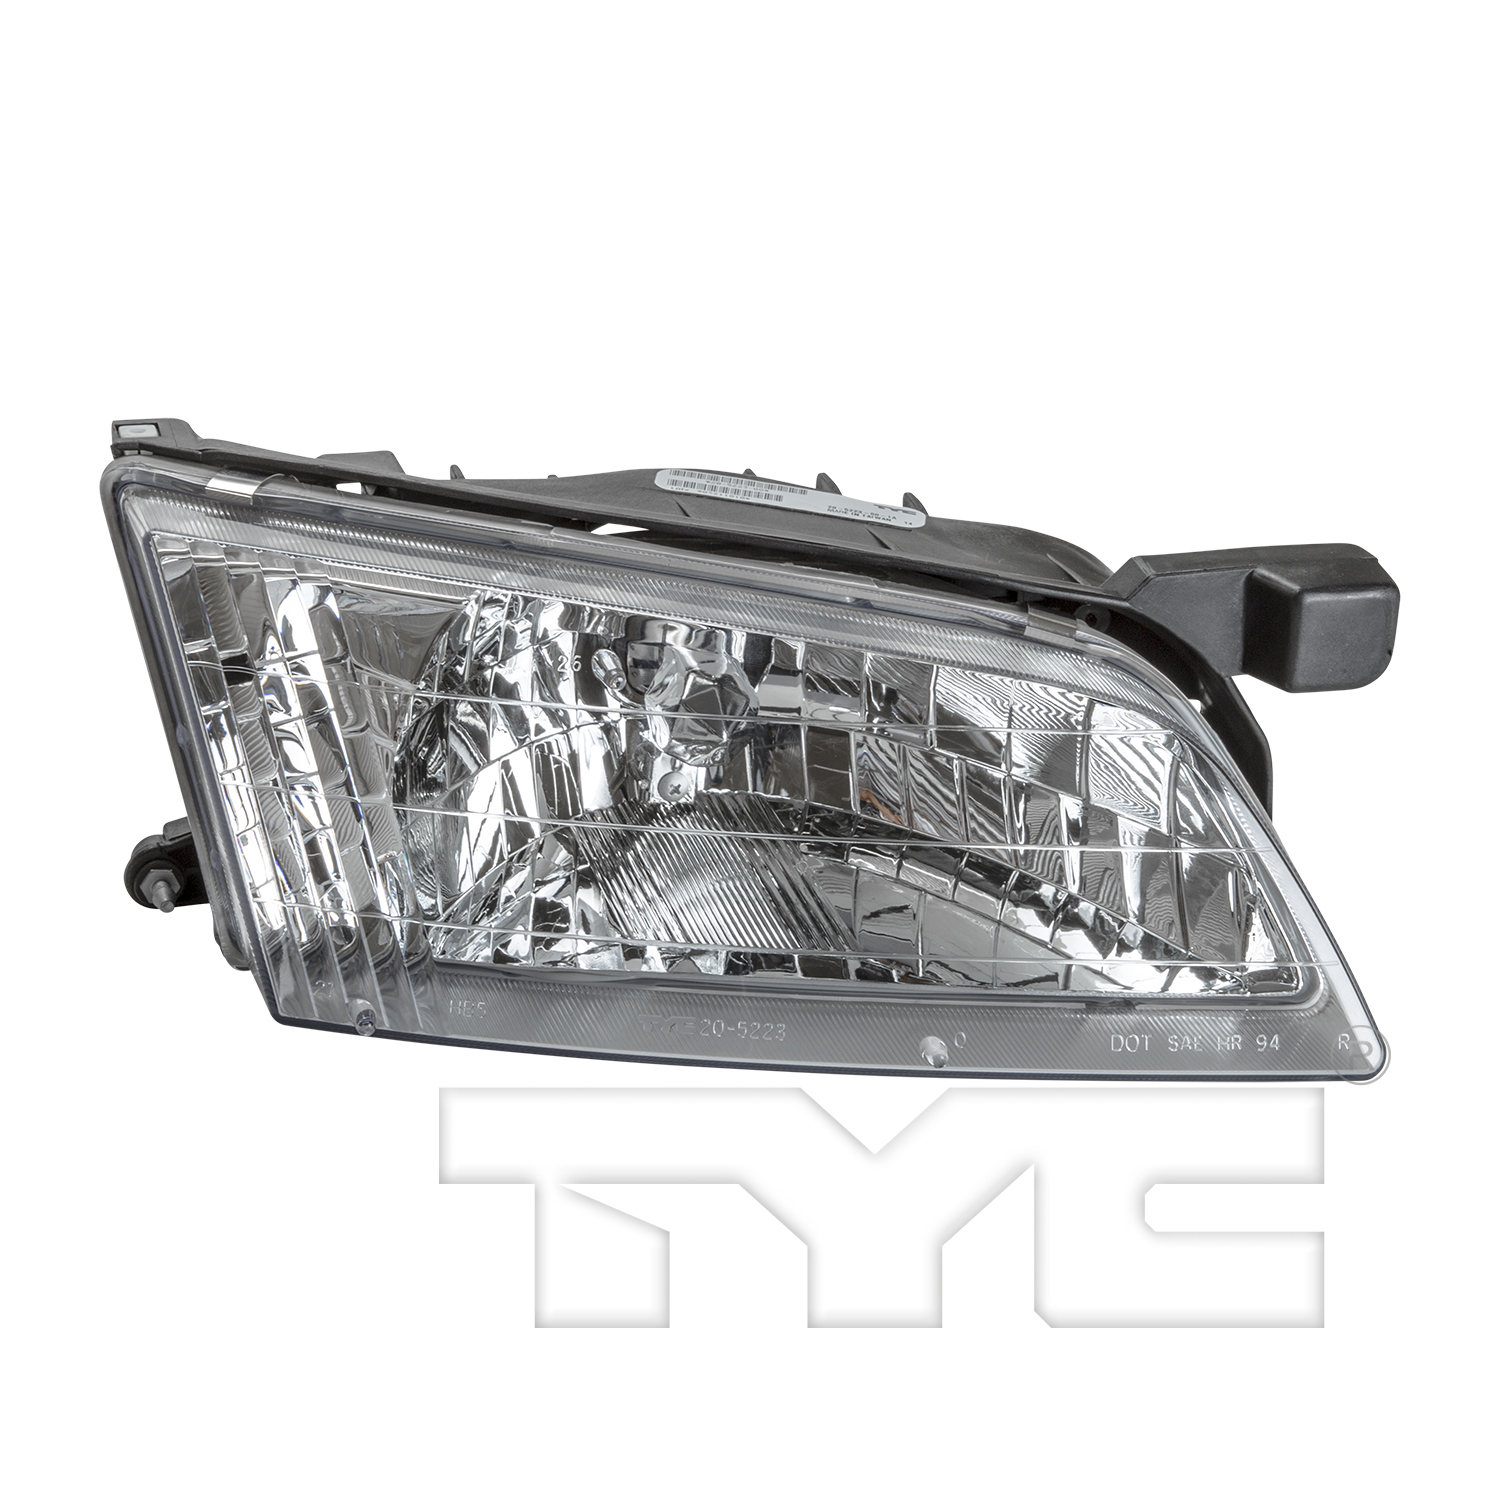 Aftermarket HEADLIGHTS for NISSAN - ALTIMA, ALTIMA,98-99,RT Headlamp assy composite